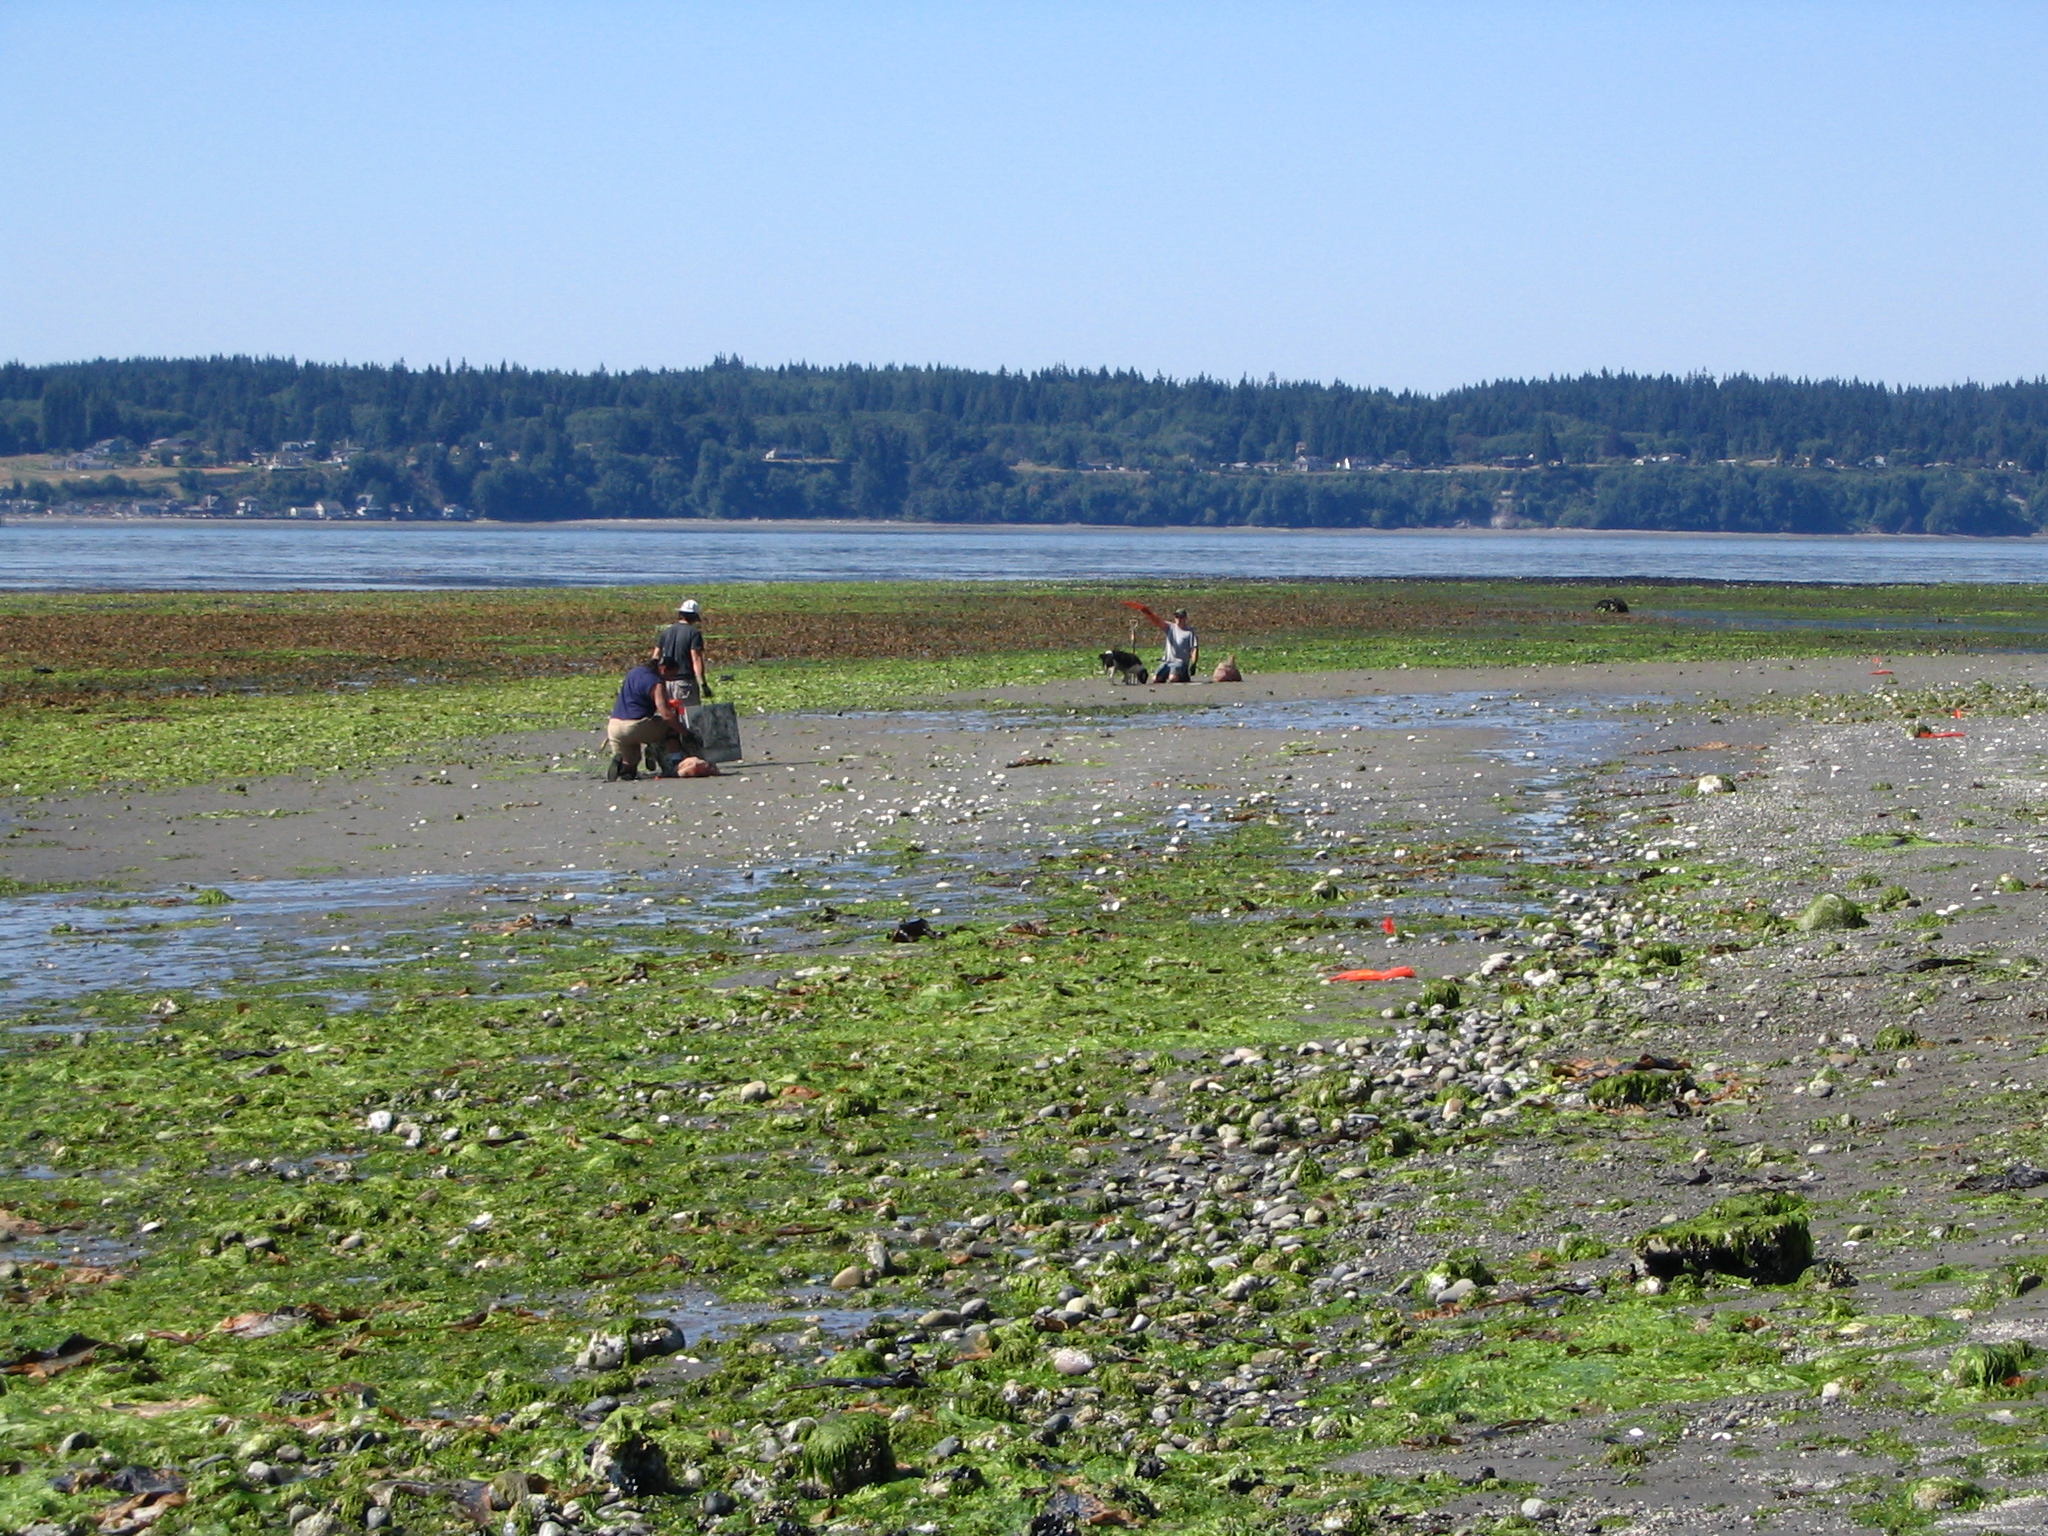 Tulalip Natural Resources Department image of clams and oysters, one